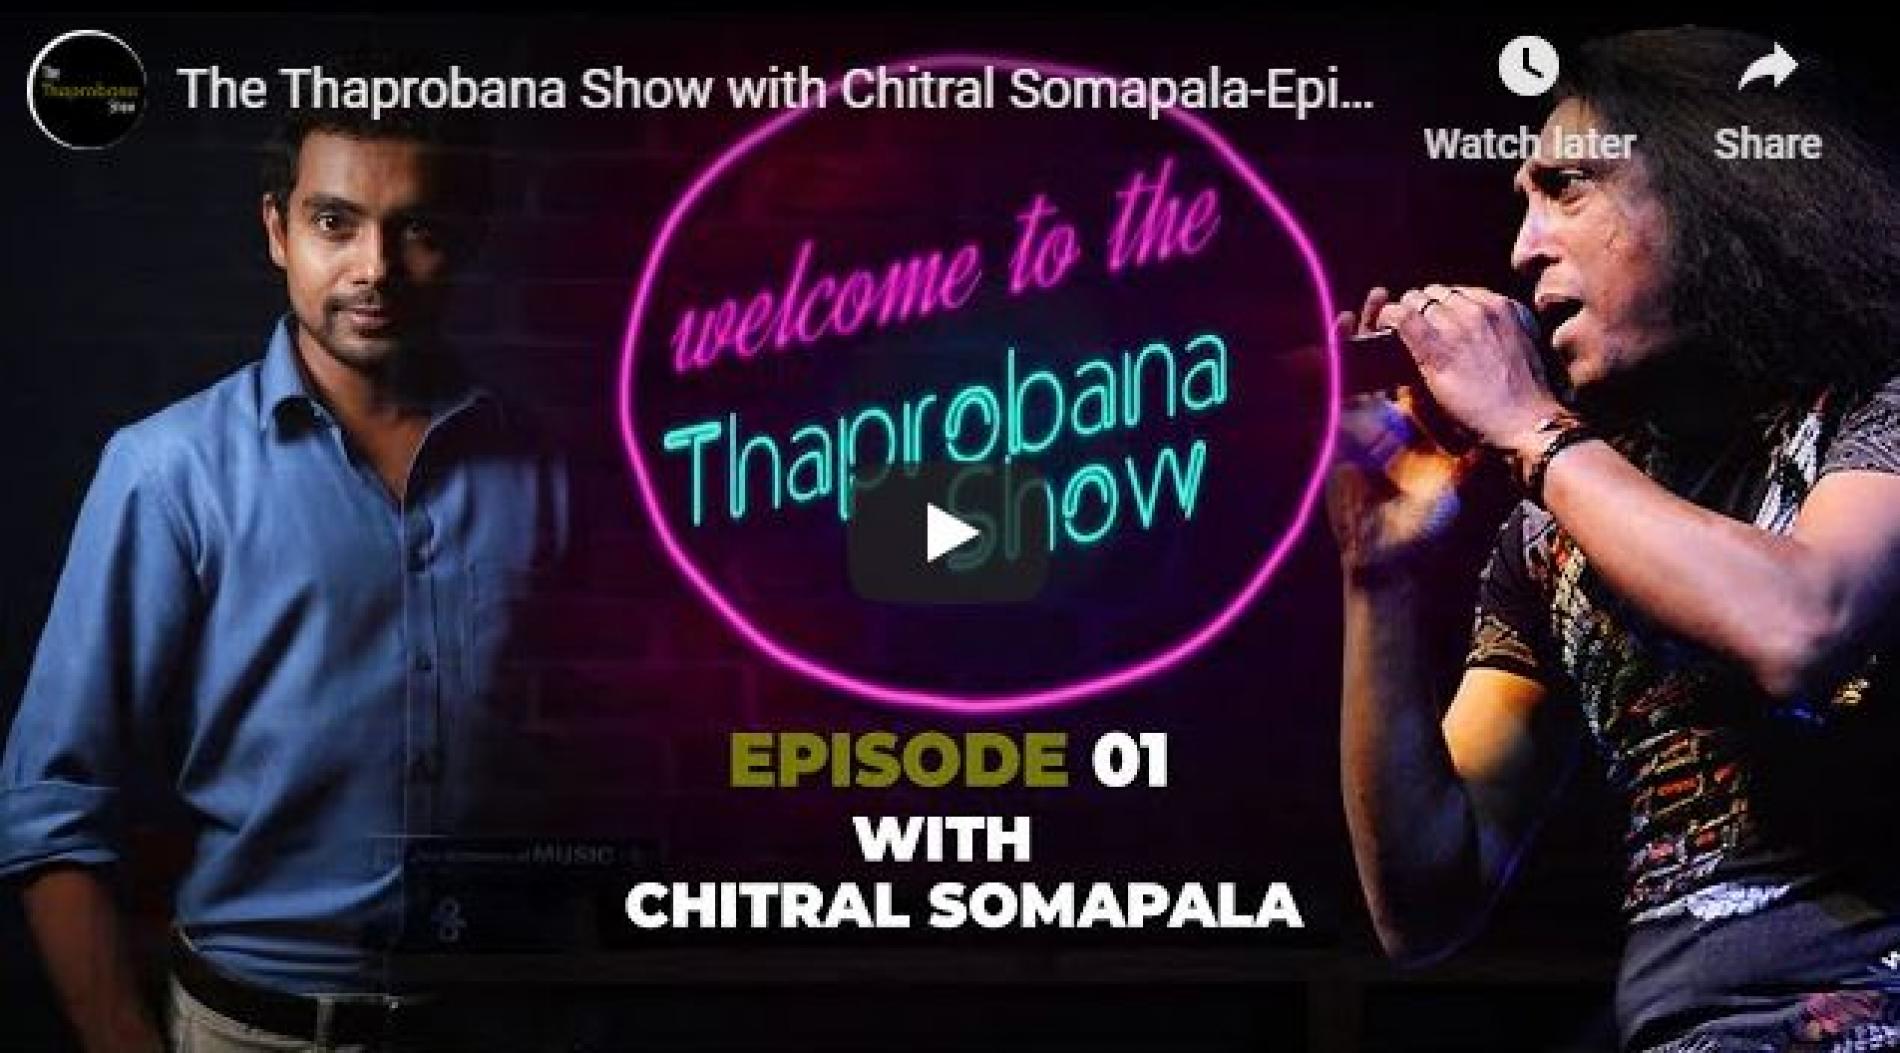 The Thaprobana Show with Chitral Somapala – Episode 01